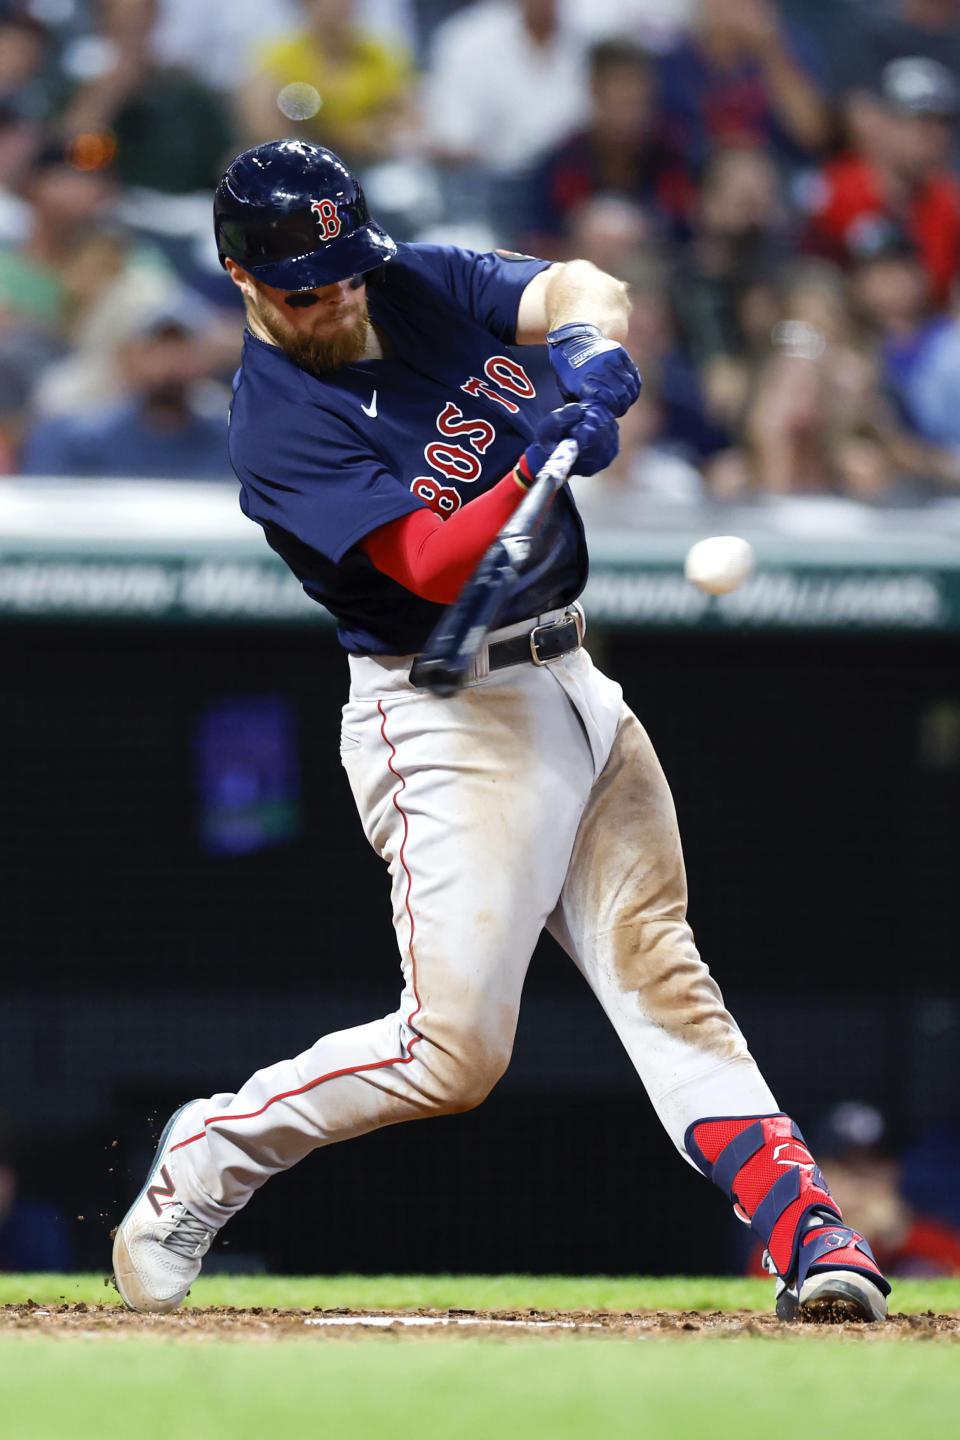 Boston Red Sox's Christian Arroyo hits a two-run home run against the Cleveland Guardians during the seventh inning of a baseball game Friday, June 24, 2022, in Cleveland. (AP Photo/Ron Schwane)